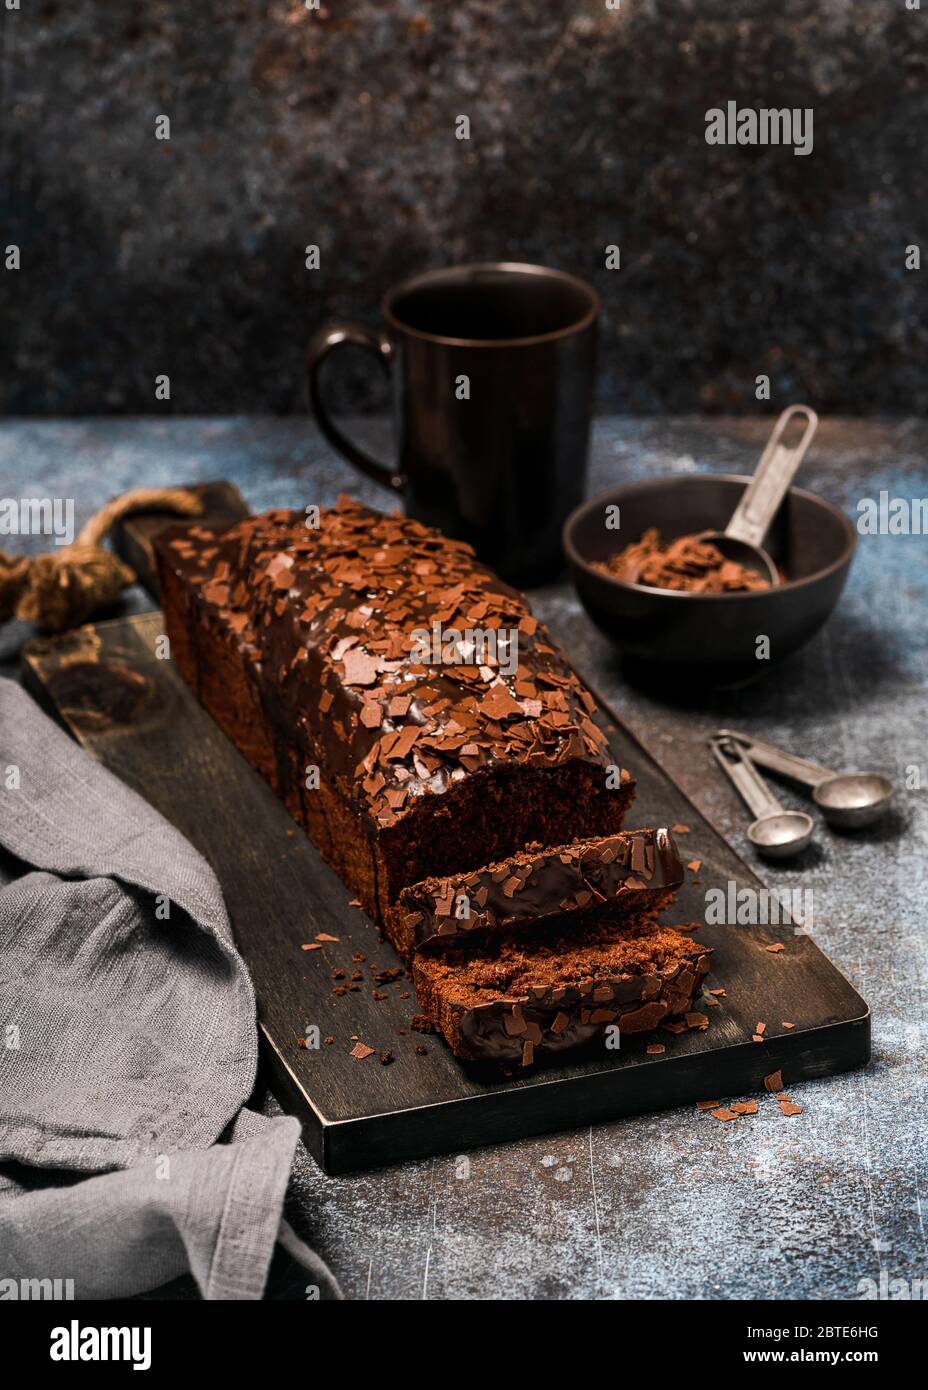 Chocolate cake with chips cut into several pieces. Homemade sweet concept. Rustic style. Selective focus. Stock Photo